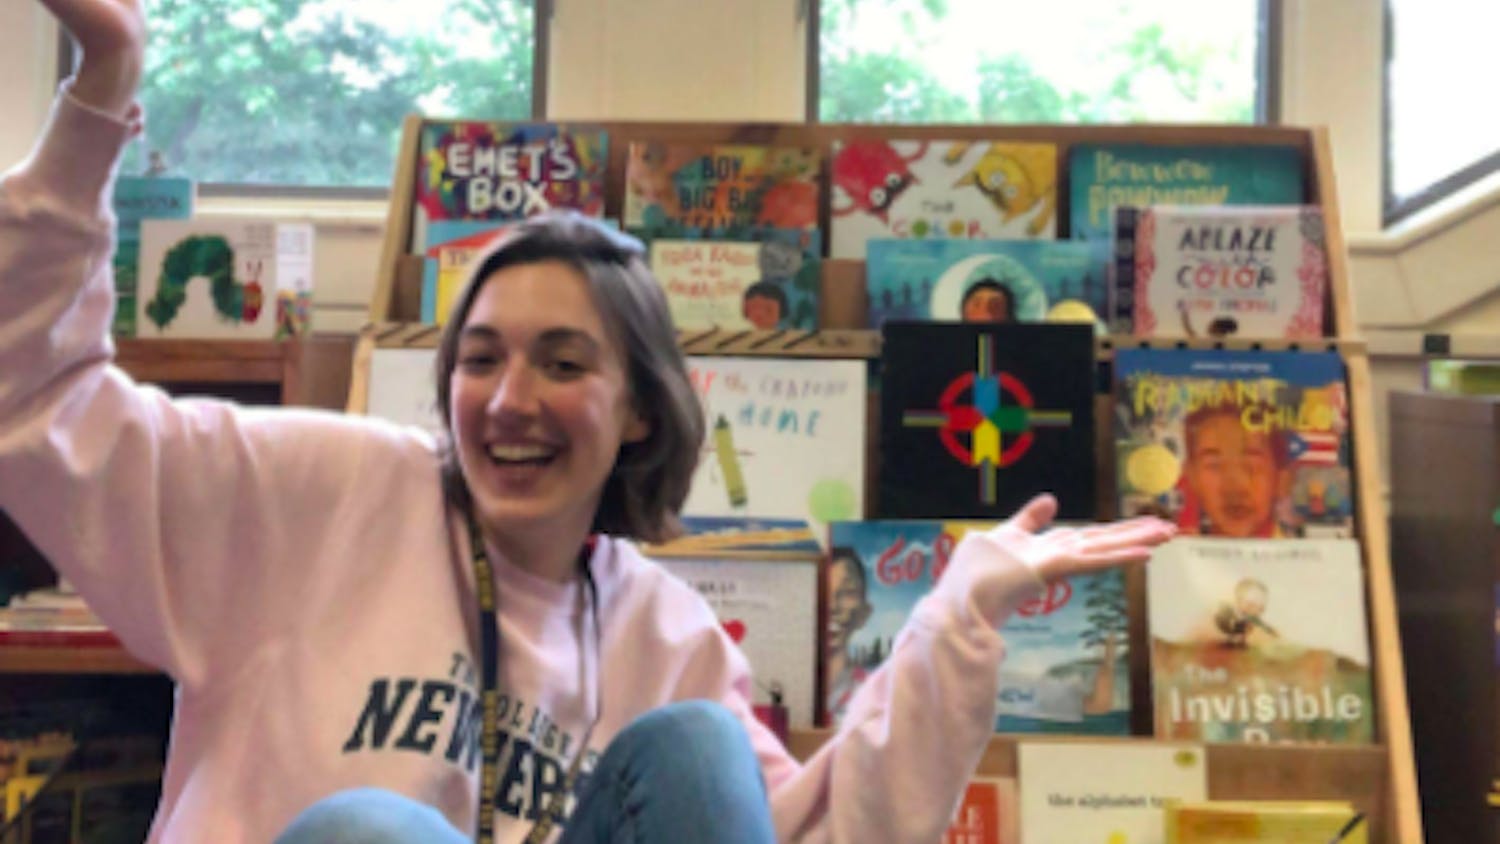 Art teacher and College alumna Megan Scarborough poses inside her classroom at the Indian Island School in Maine (Photo courtesy of Megan Scarborough).